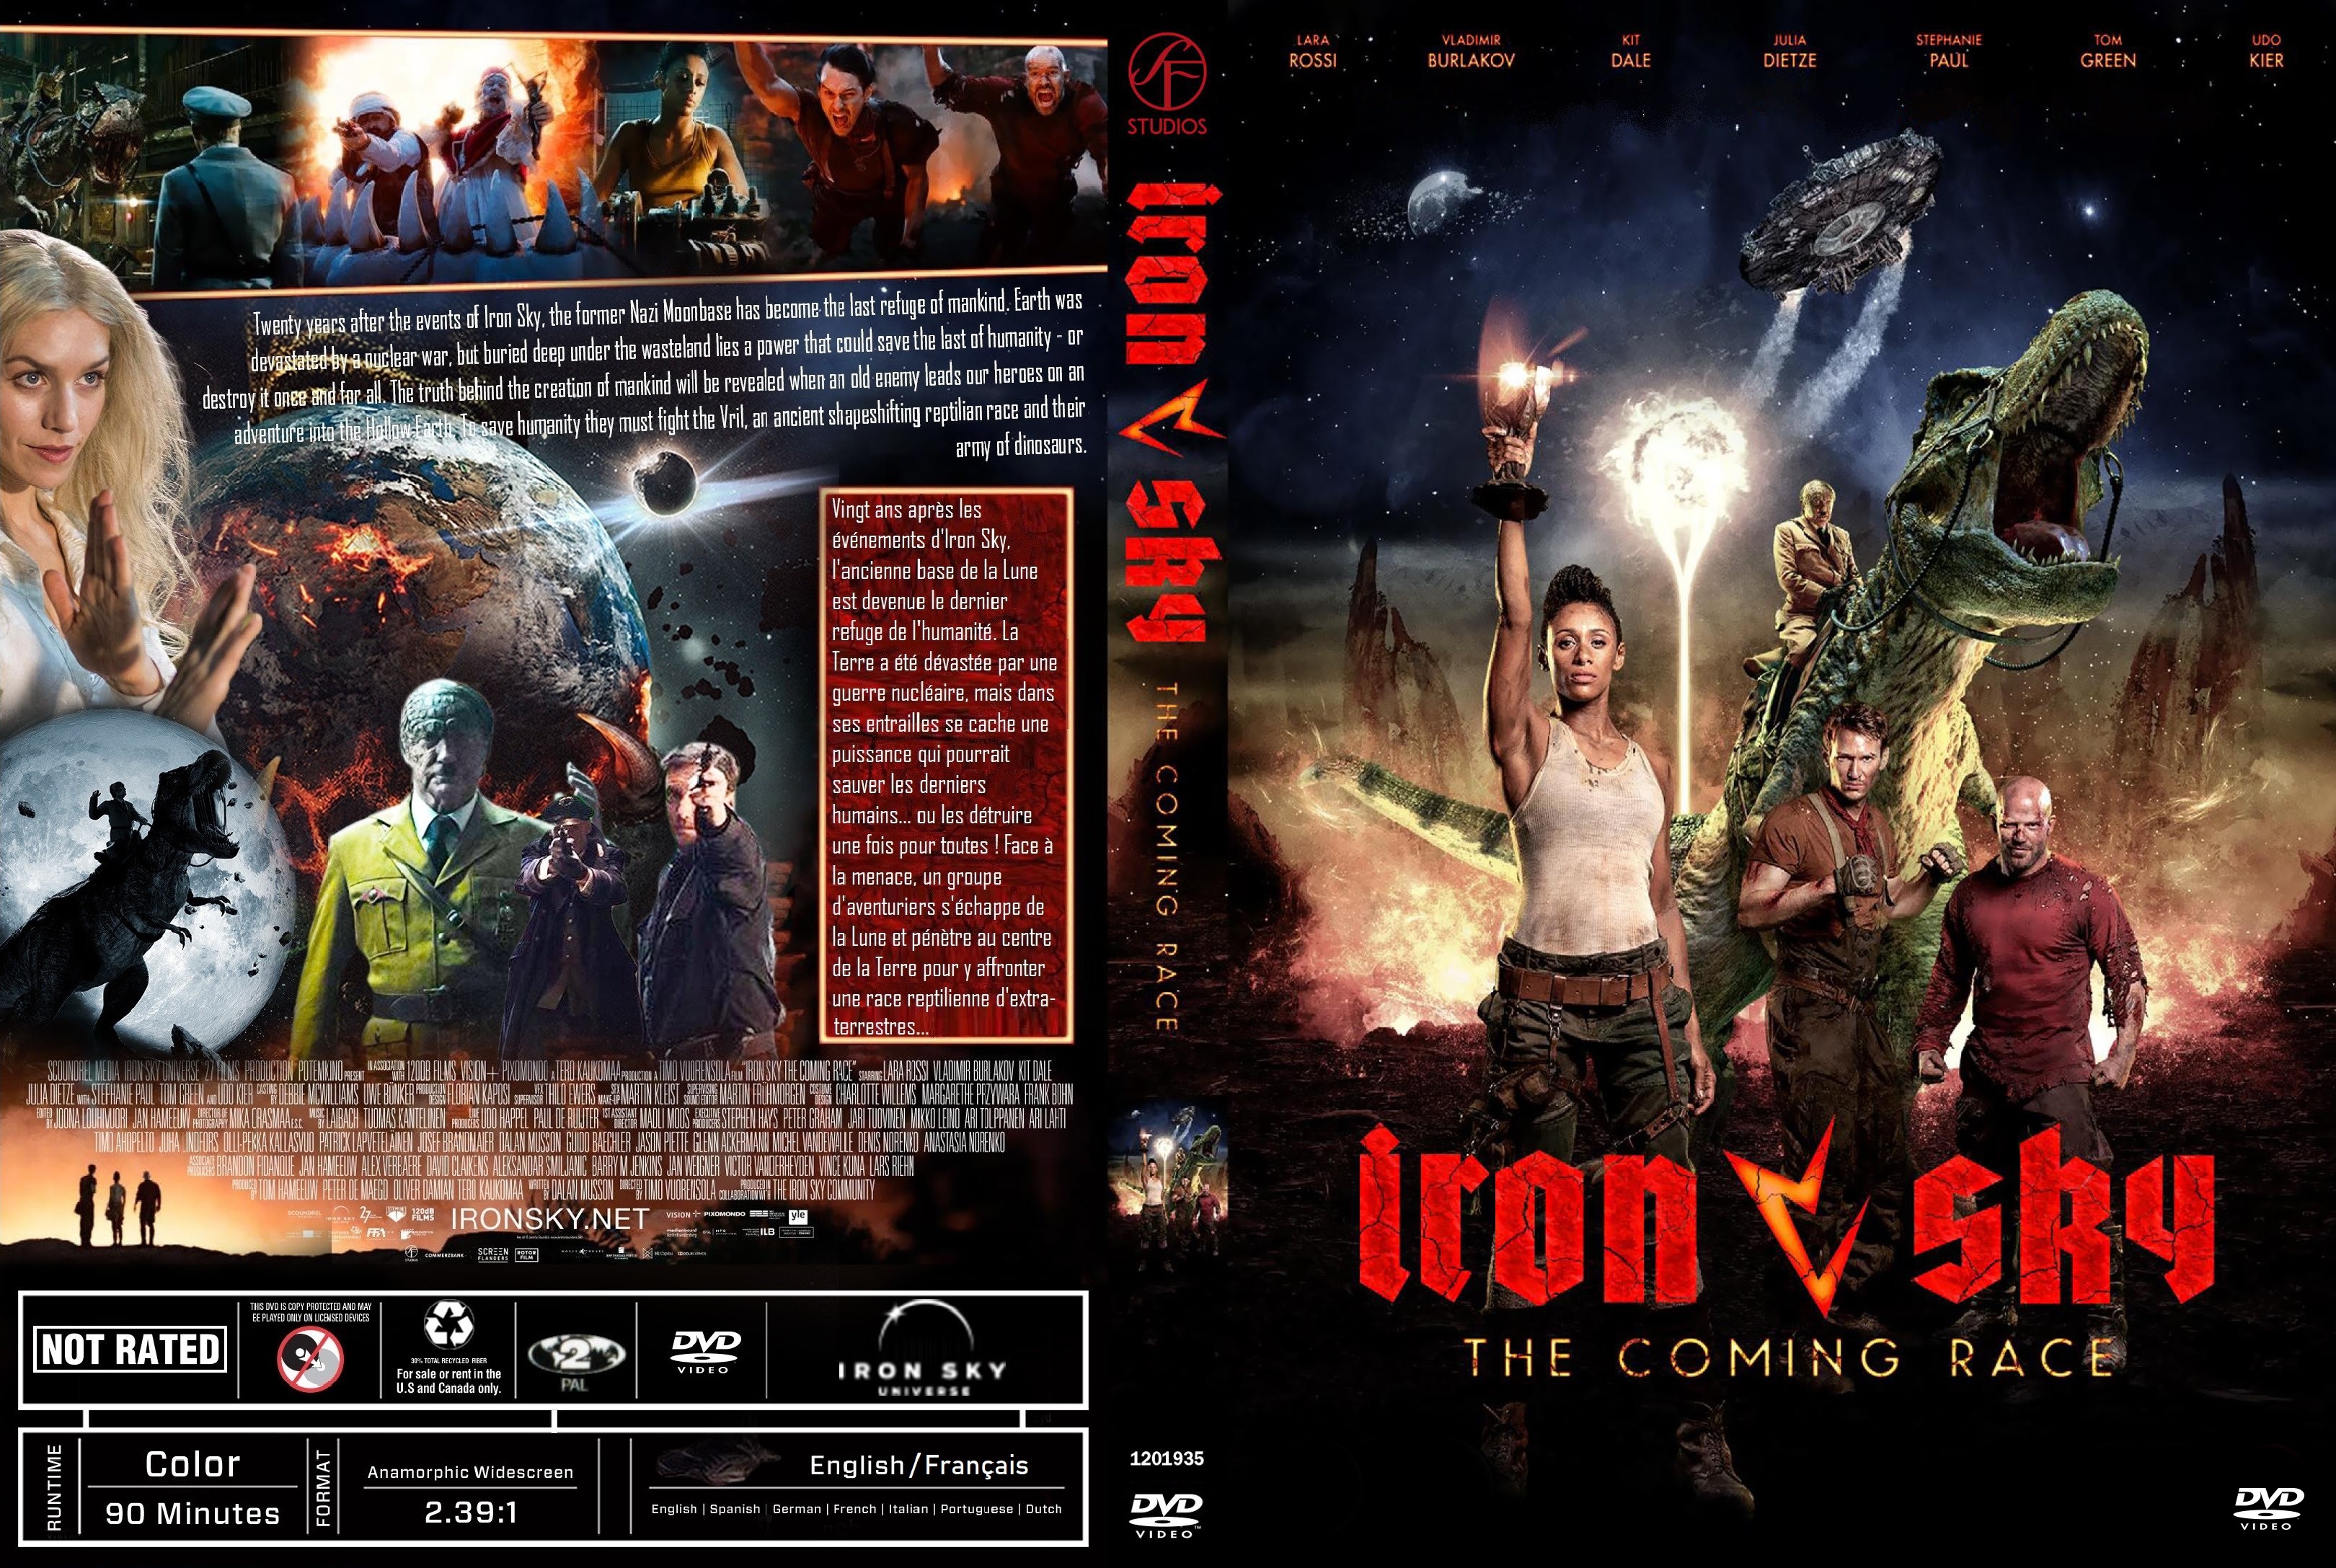 Jaquette DVD Iron Sky The Coming Race custom